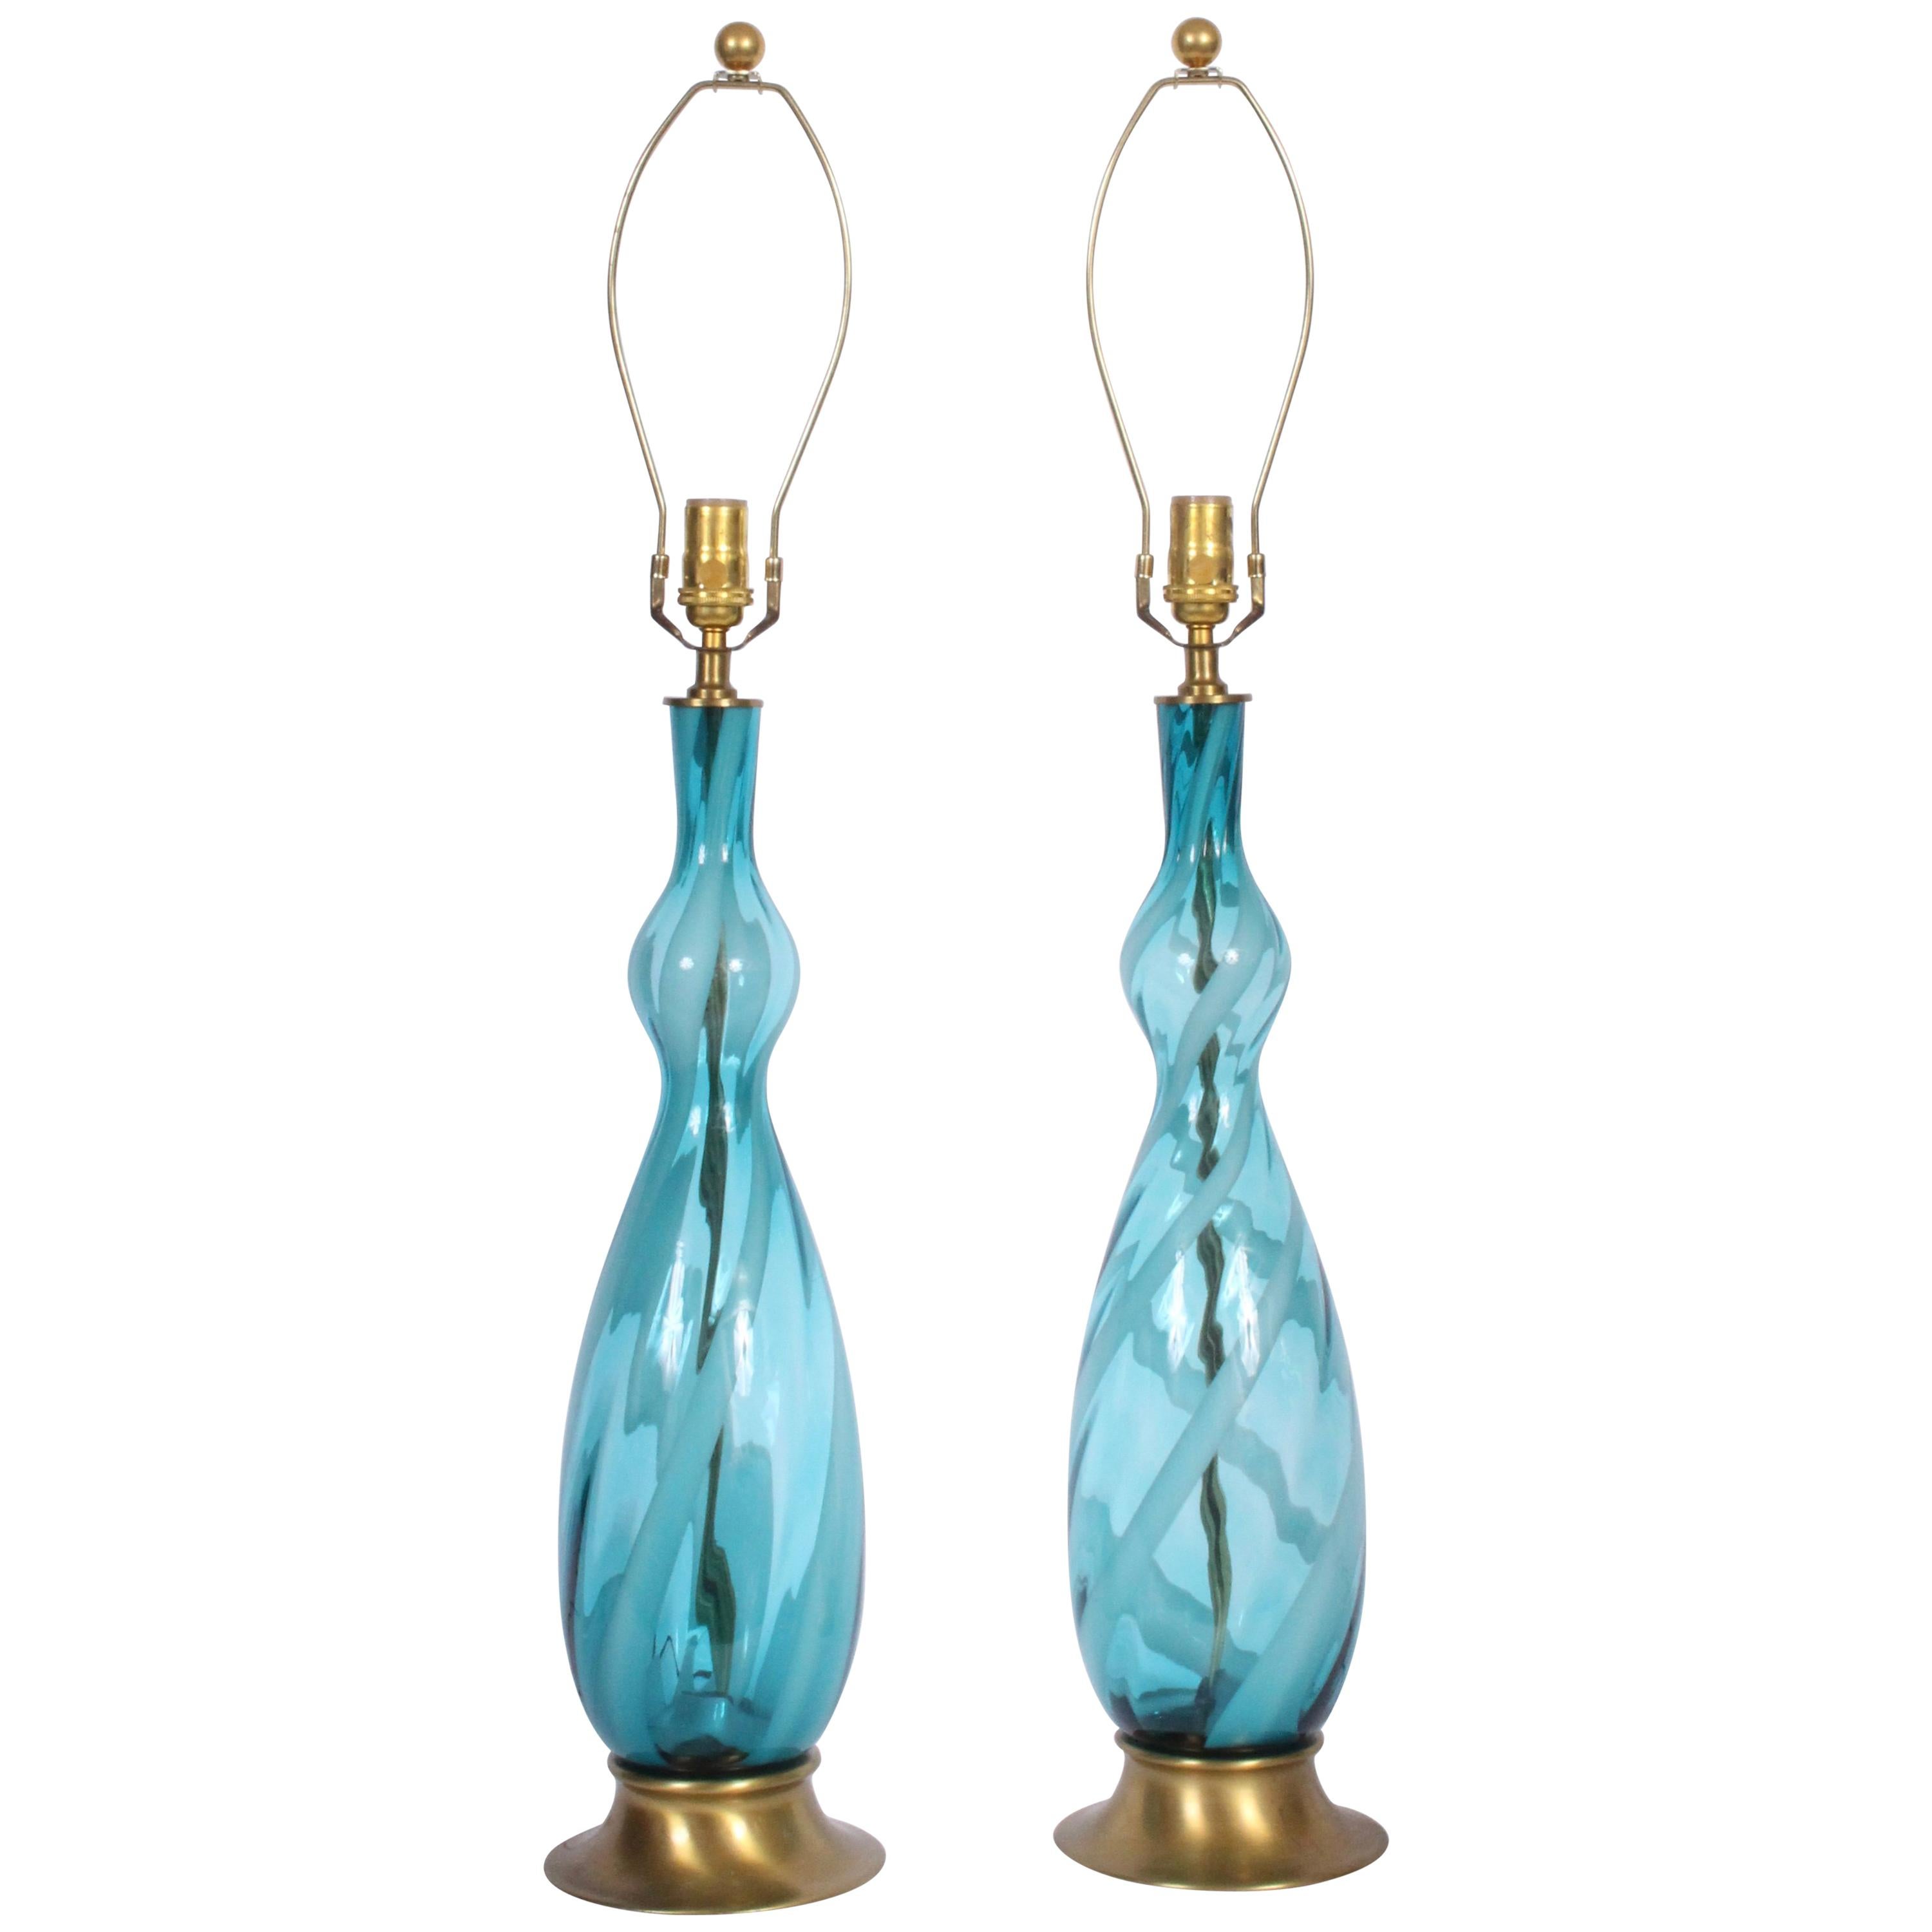 Monumental Pair of Turquoise and White Swirl Murano Art Glass Table Lamps, 1960s